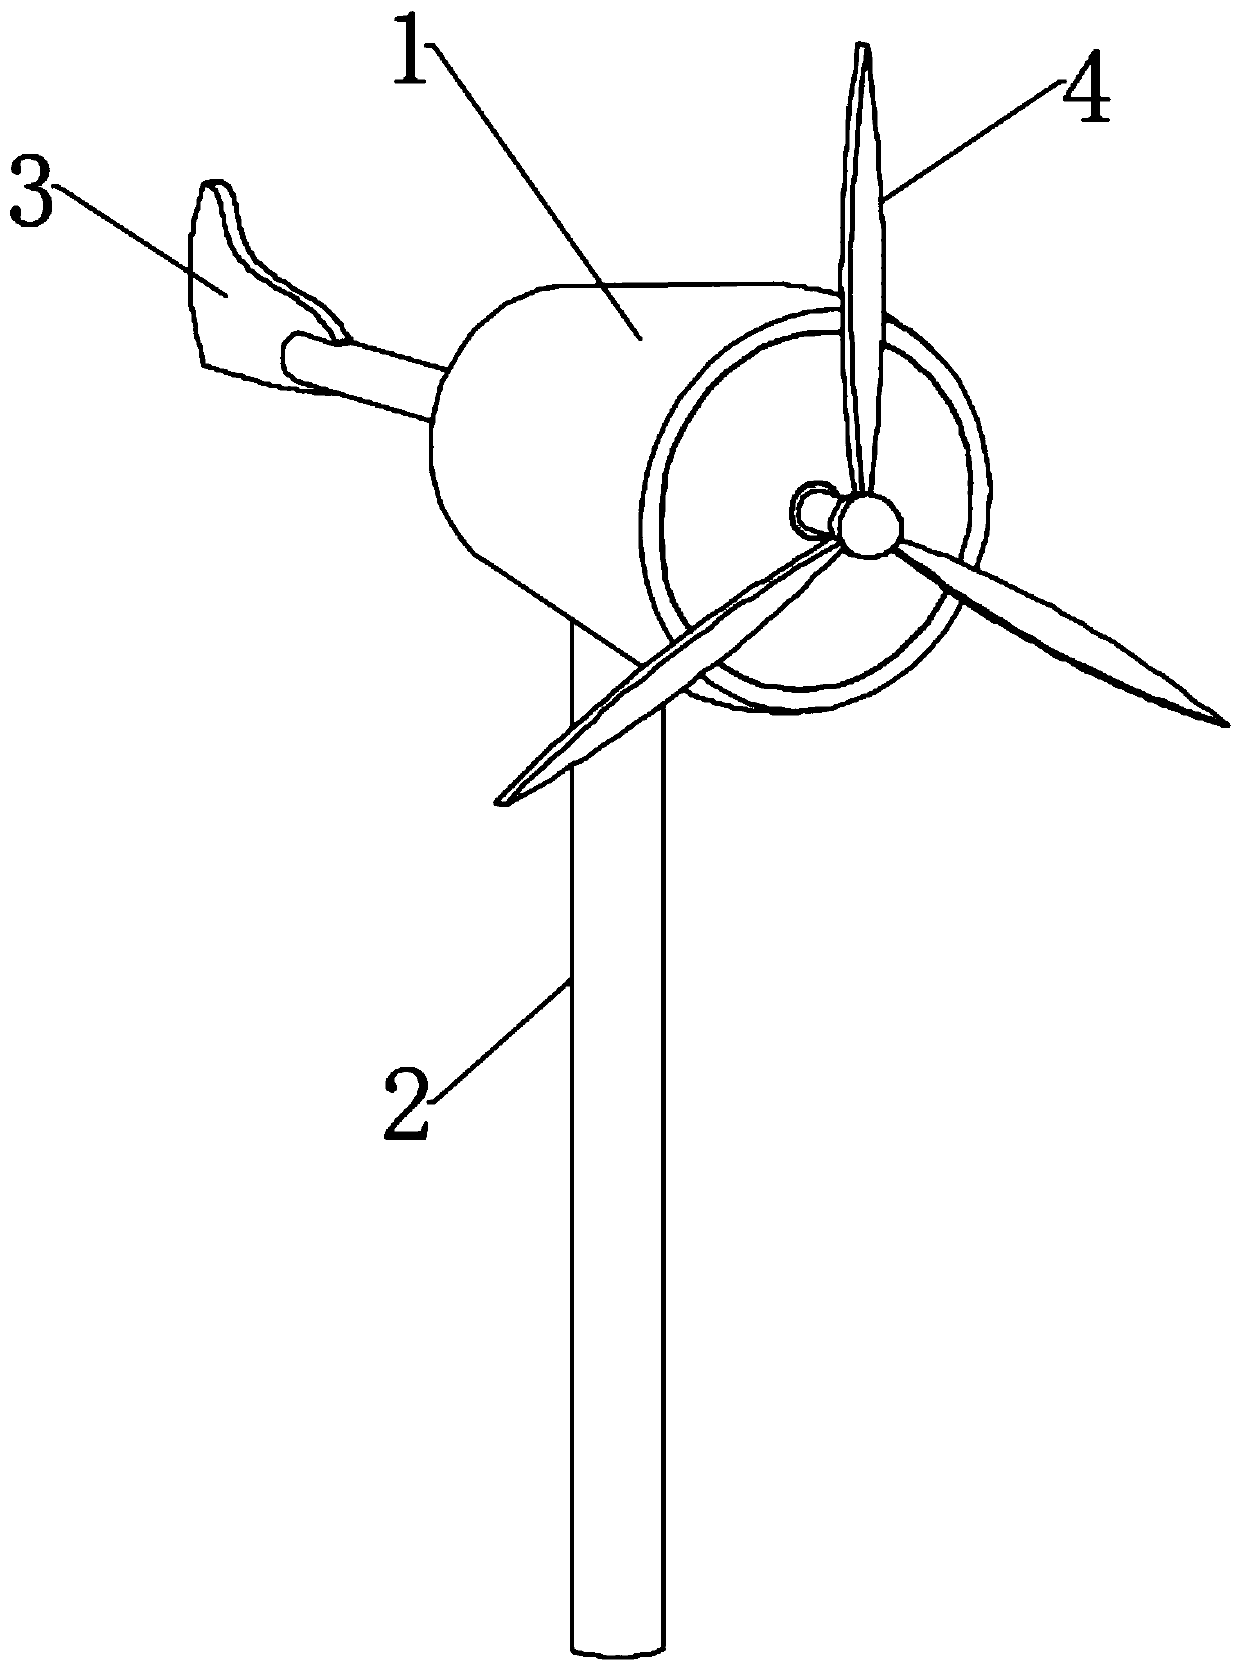 Environment-friendly low-noise wind-driven generator